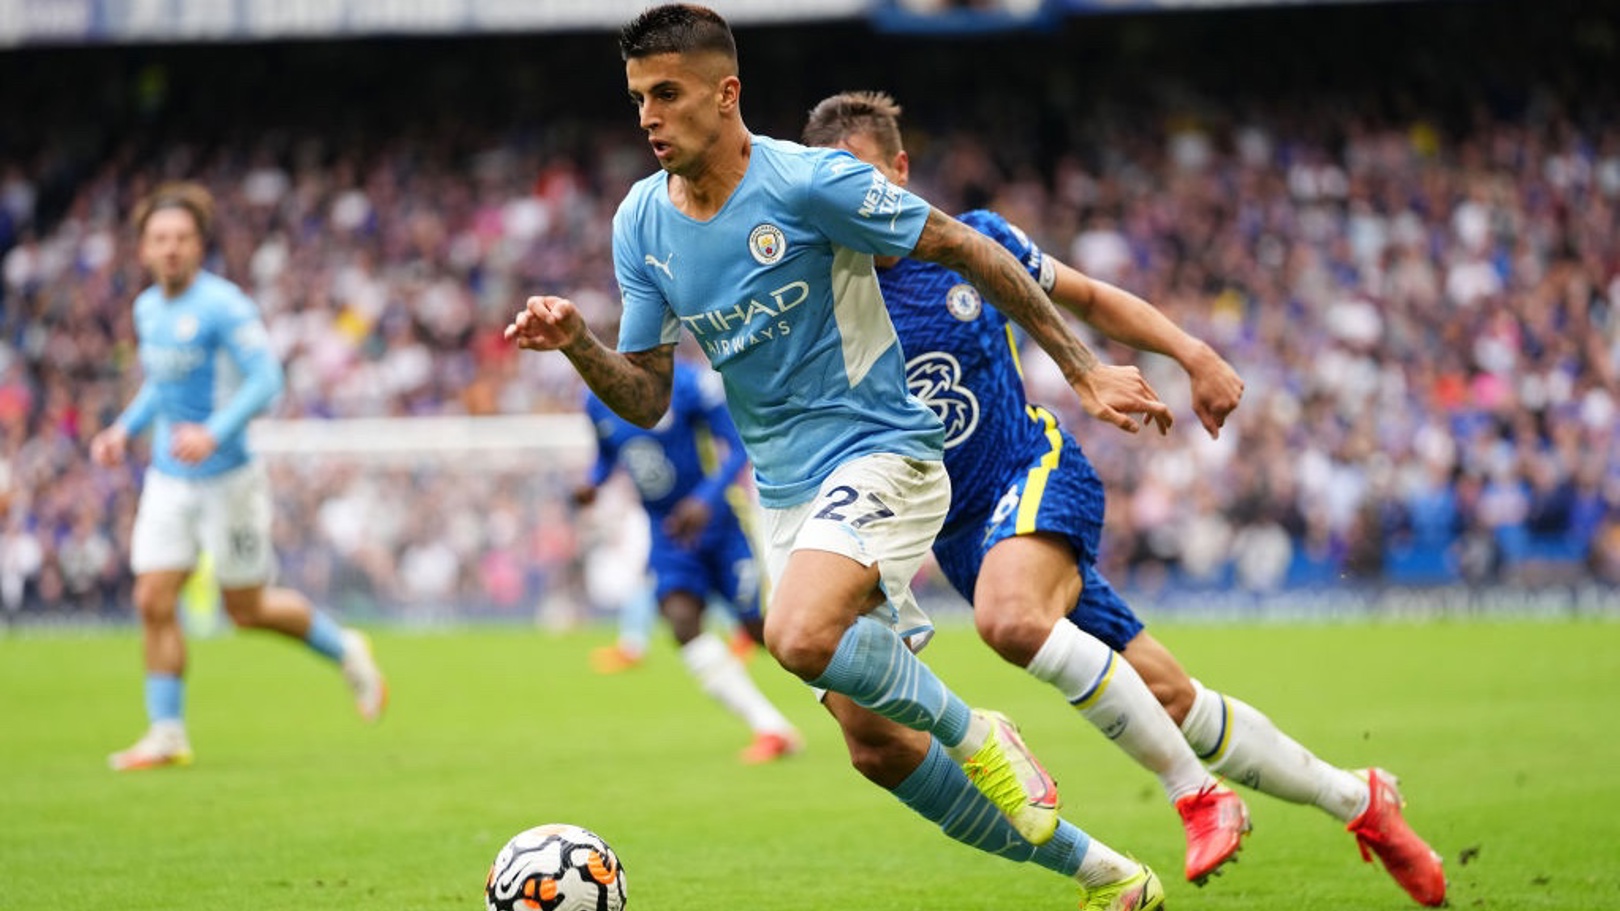 Joao Cancelo on his versatility, Klopp v Pep and one of the hardest weeks of his career 